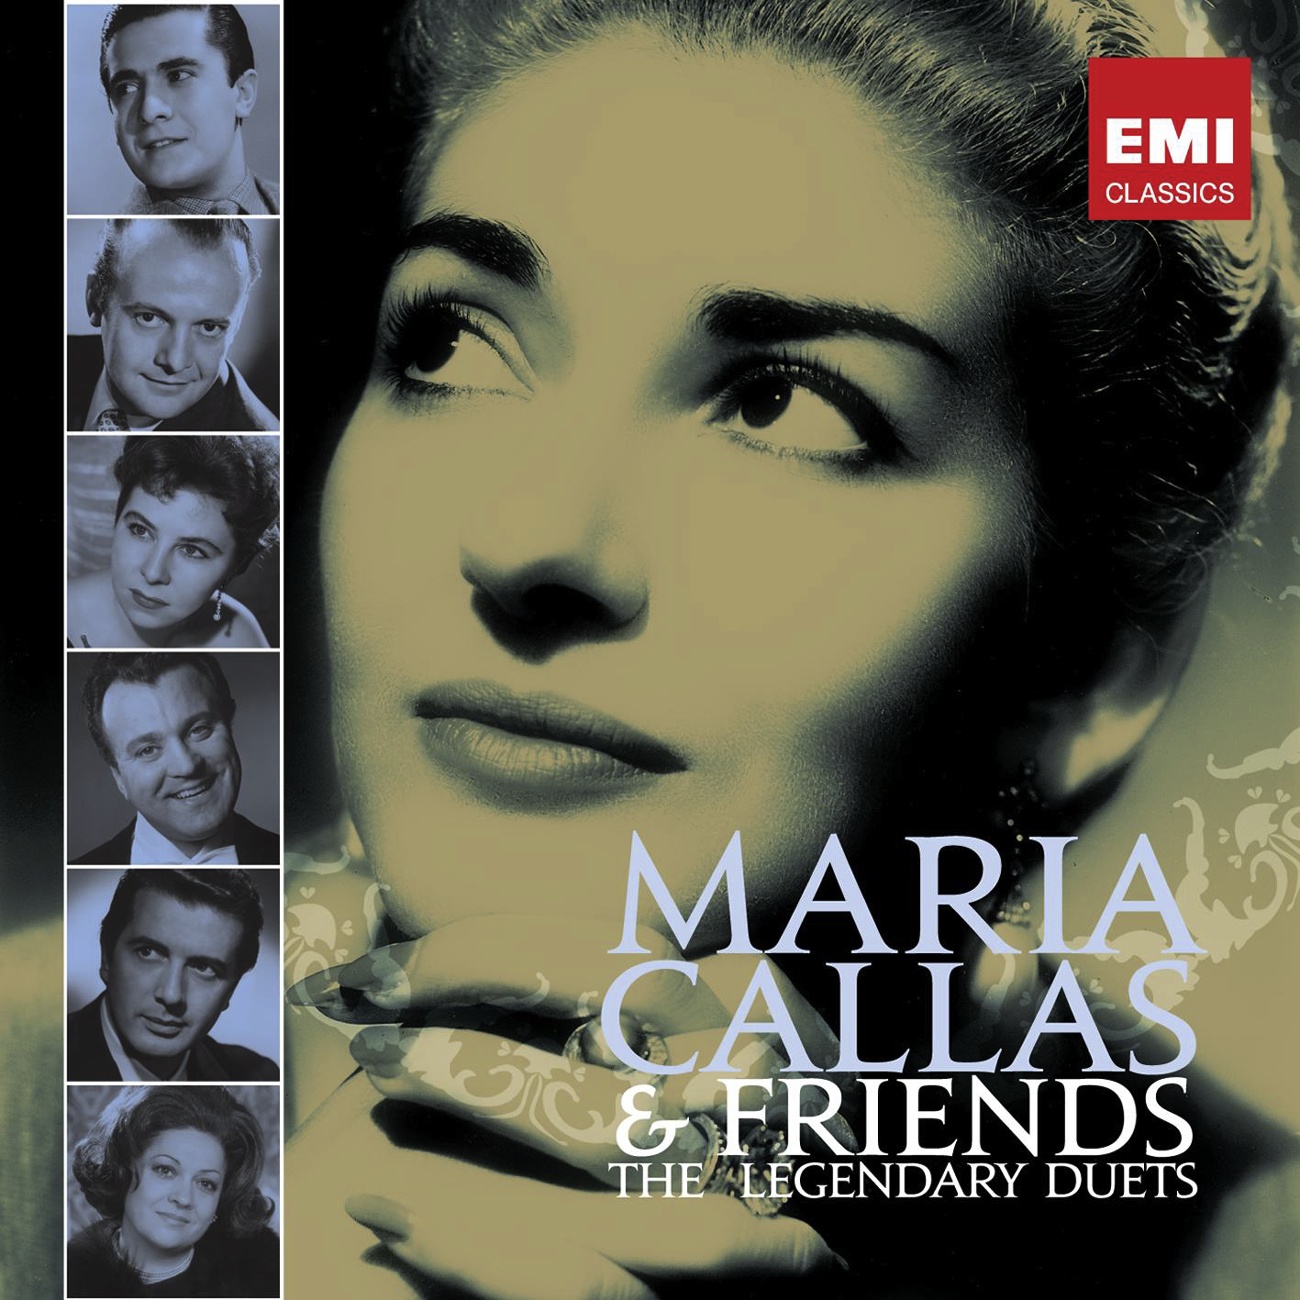 Callas and Friends: The Legendary Duets